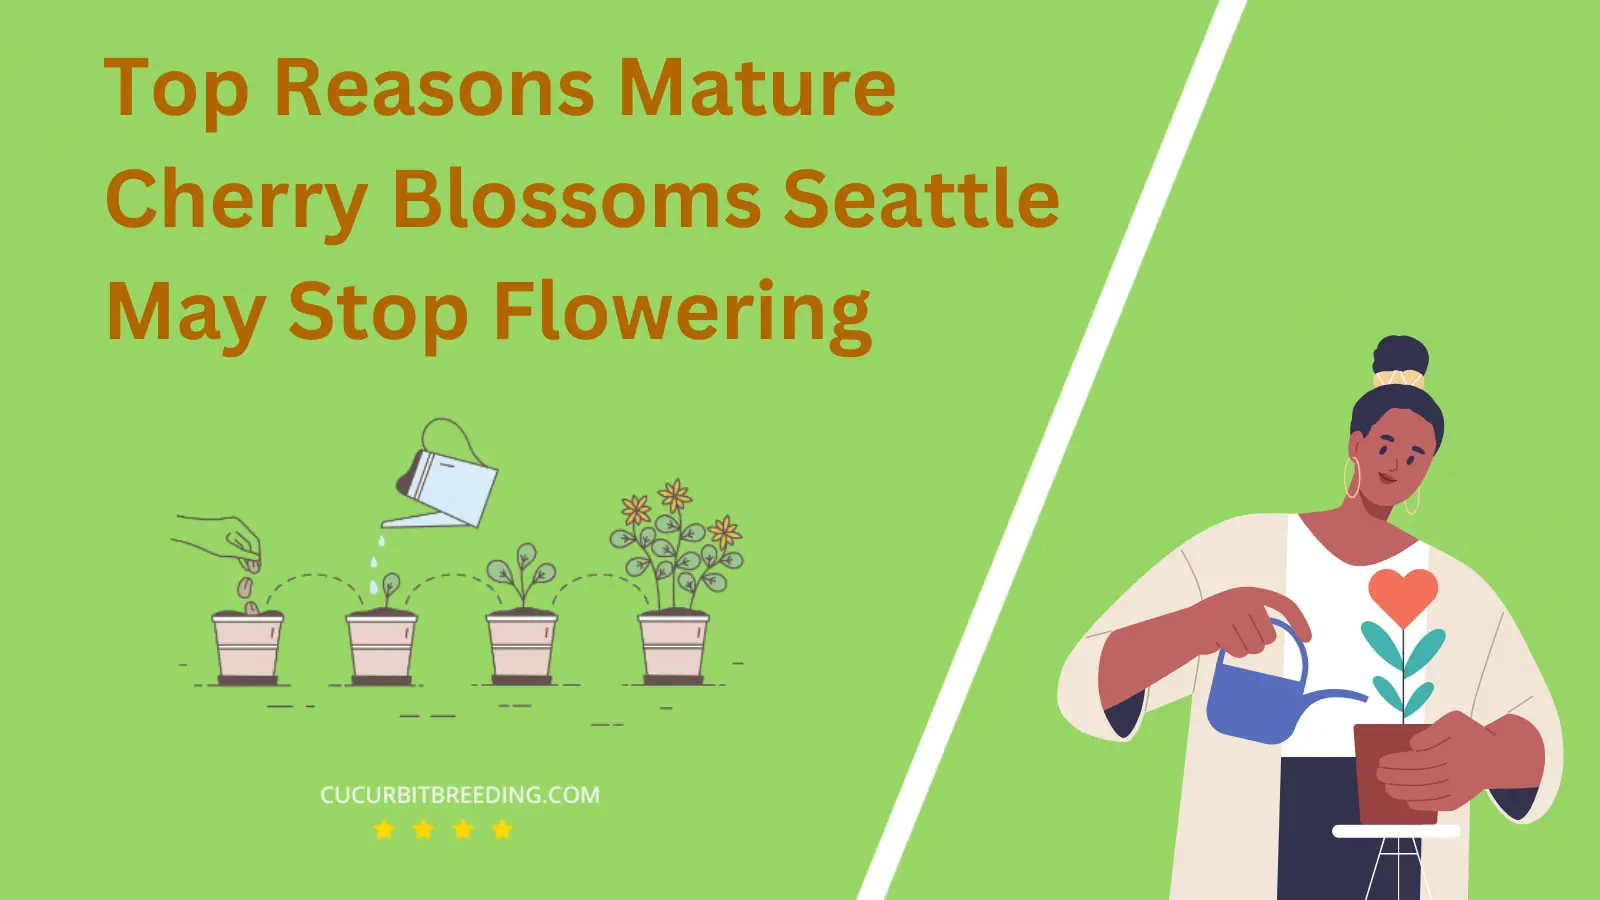 Top Reasons Mature Cherry Blossoms Seattle May Stop Flowering